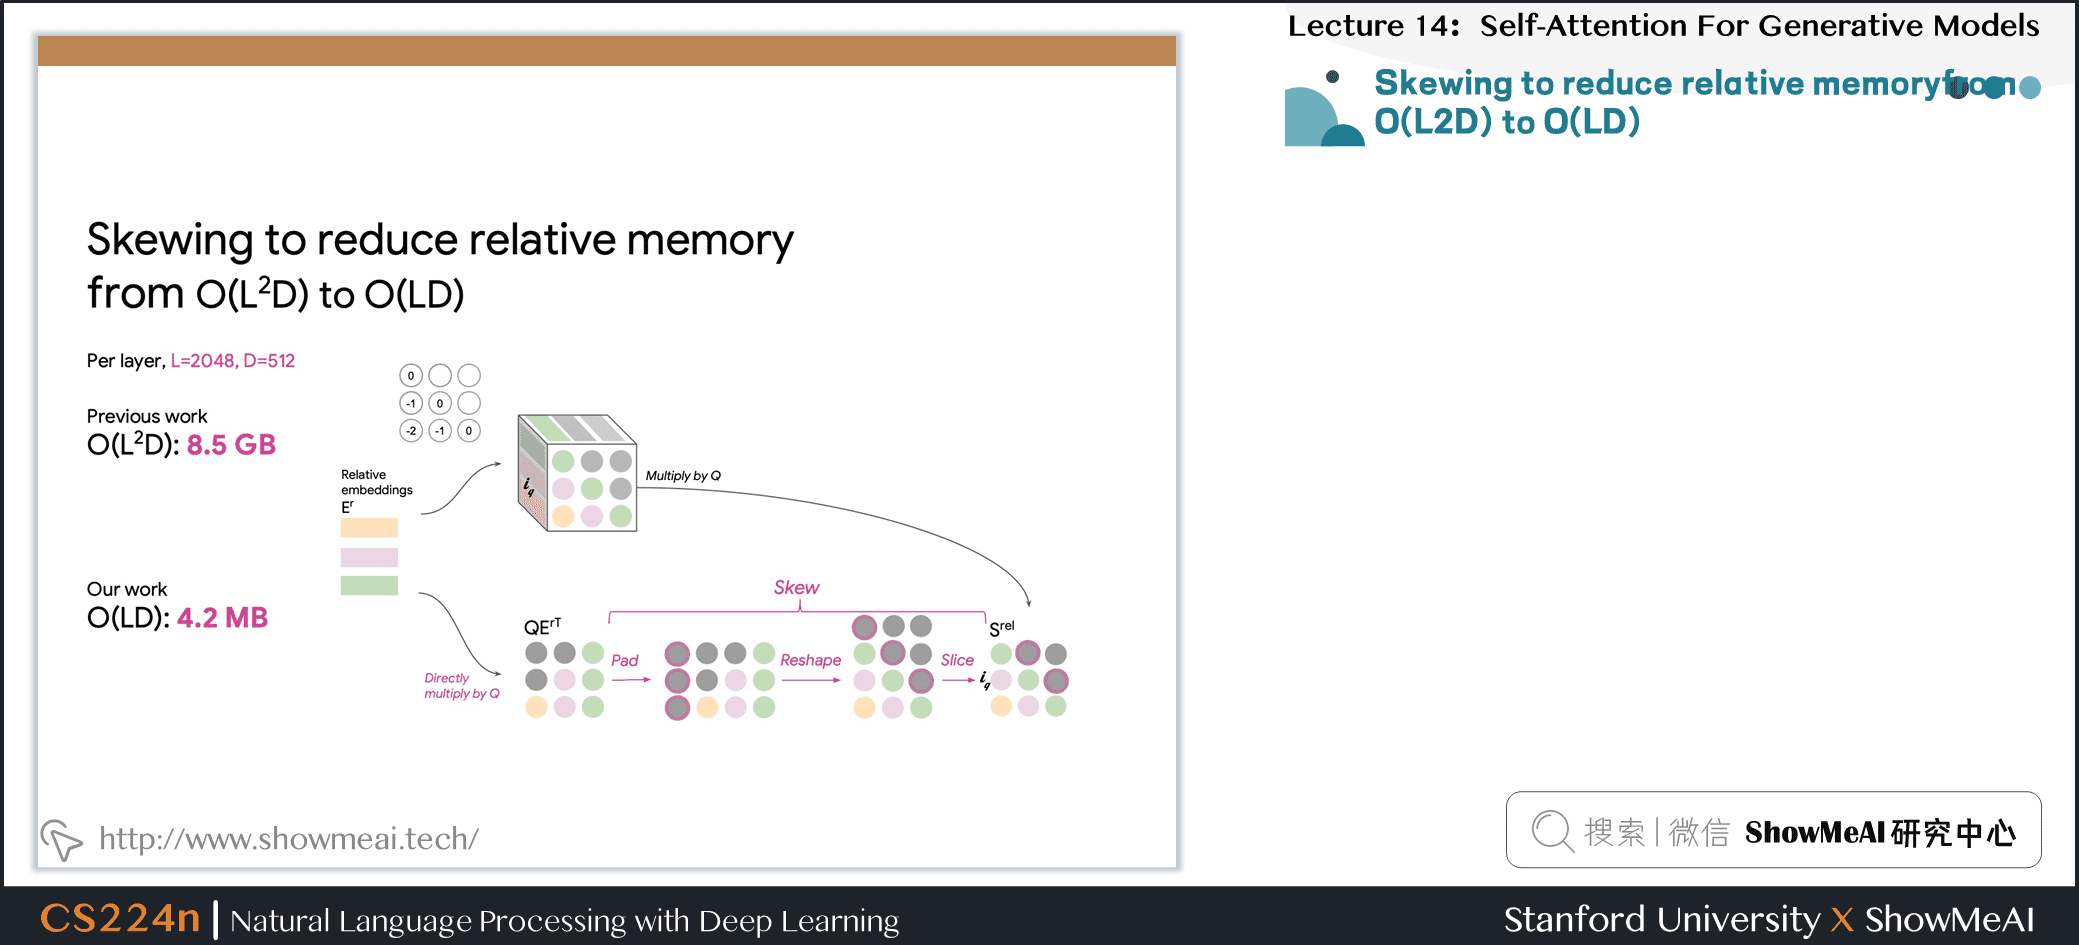 Skewing to reduce relative memoryfrom O(L2D) to O(LD)